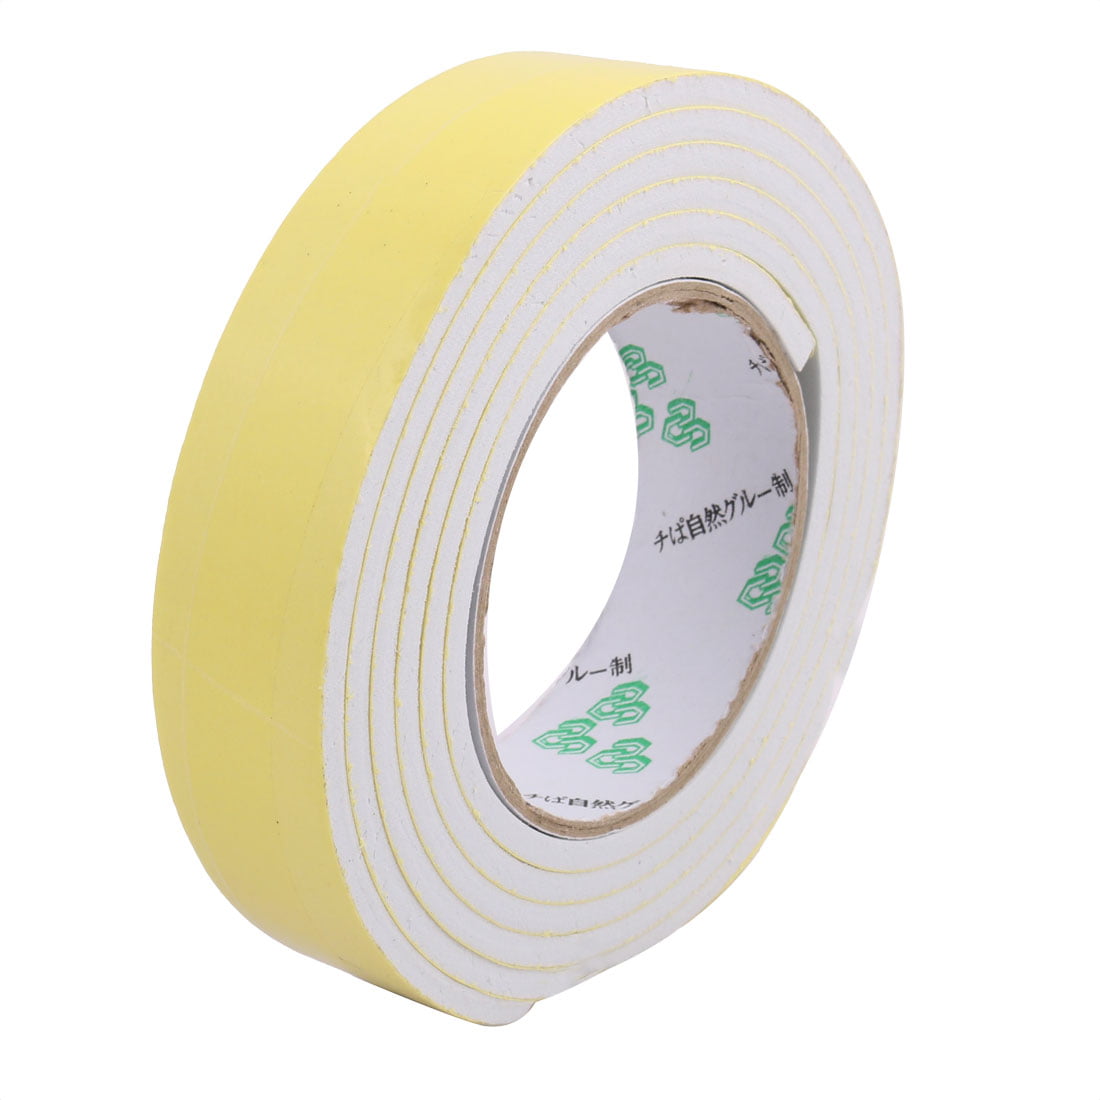 Lurrose 4 Rolls Strong Adhesive Foam Durable Thicken Multifunction Double Sided Tape EVA Sponge Sealing Tape for Office School Home 